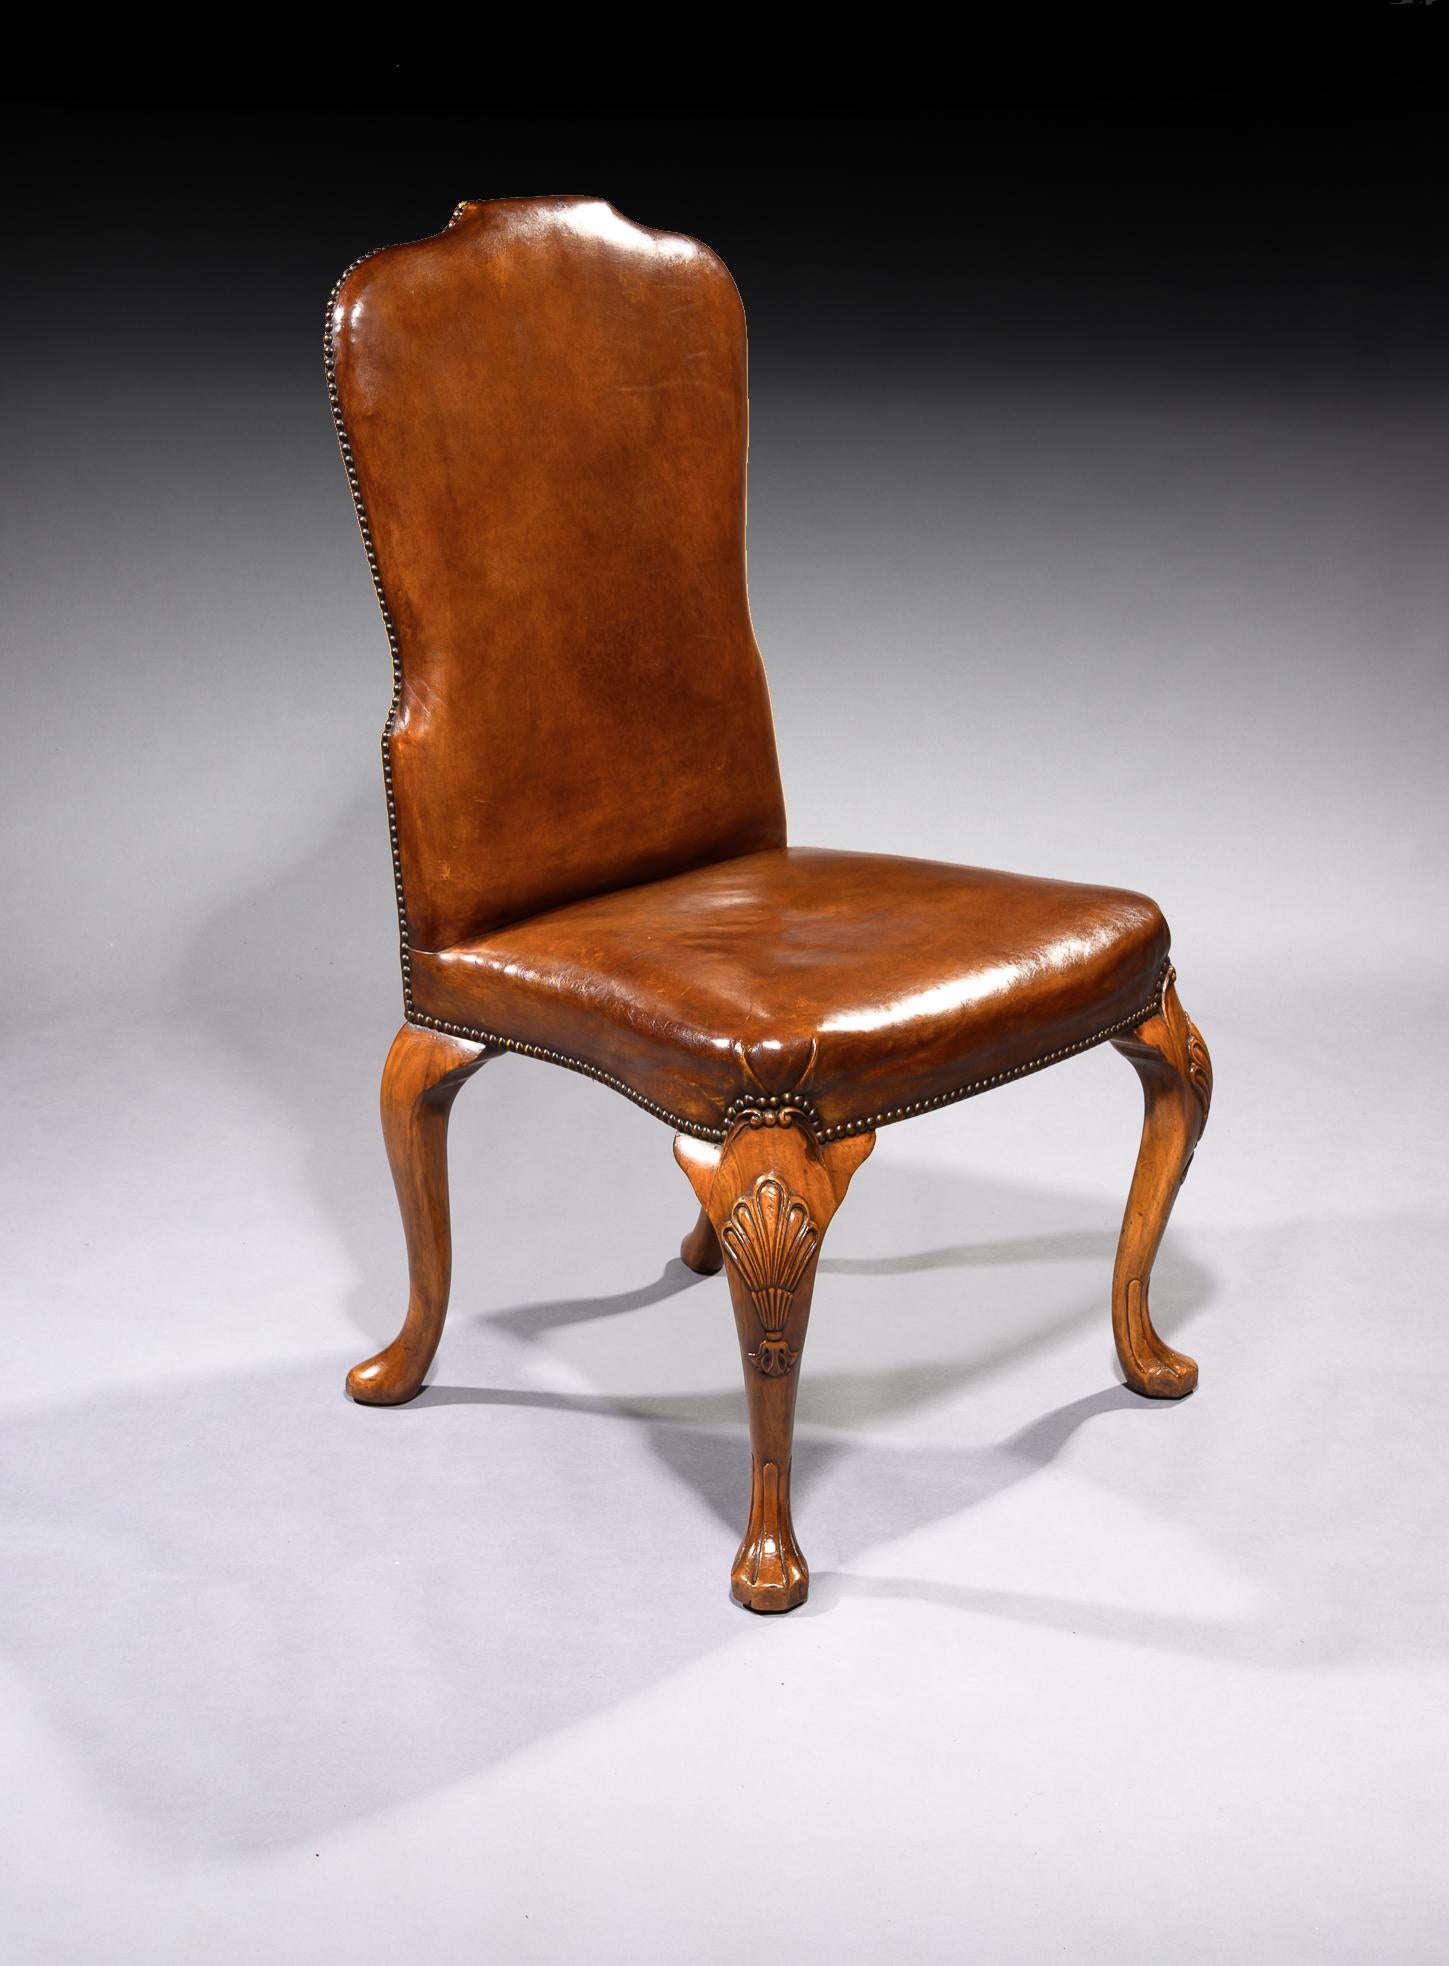 English Fine Set of 8 '6 & 2' Generously Sized Antique Walnut and Leather Dining Chairs